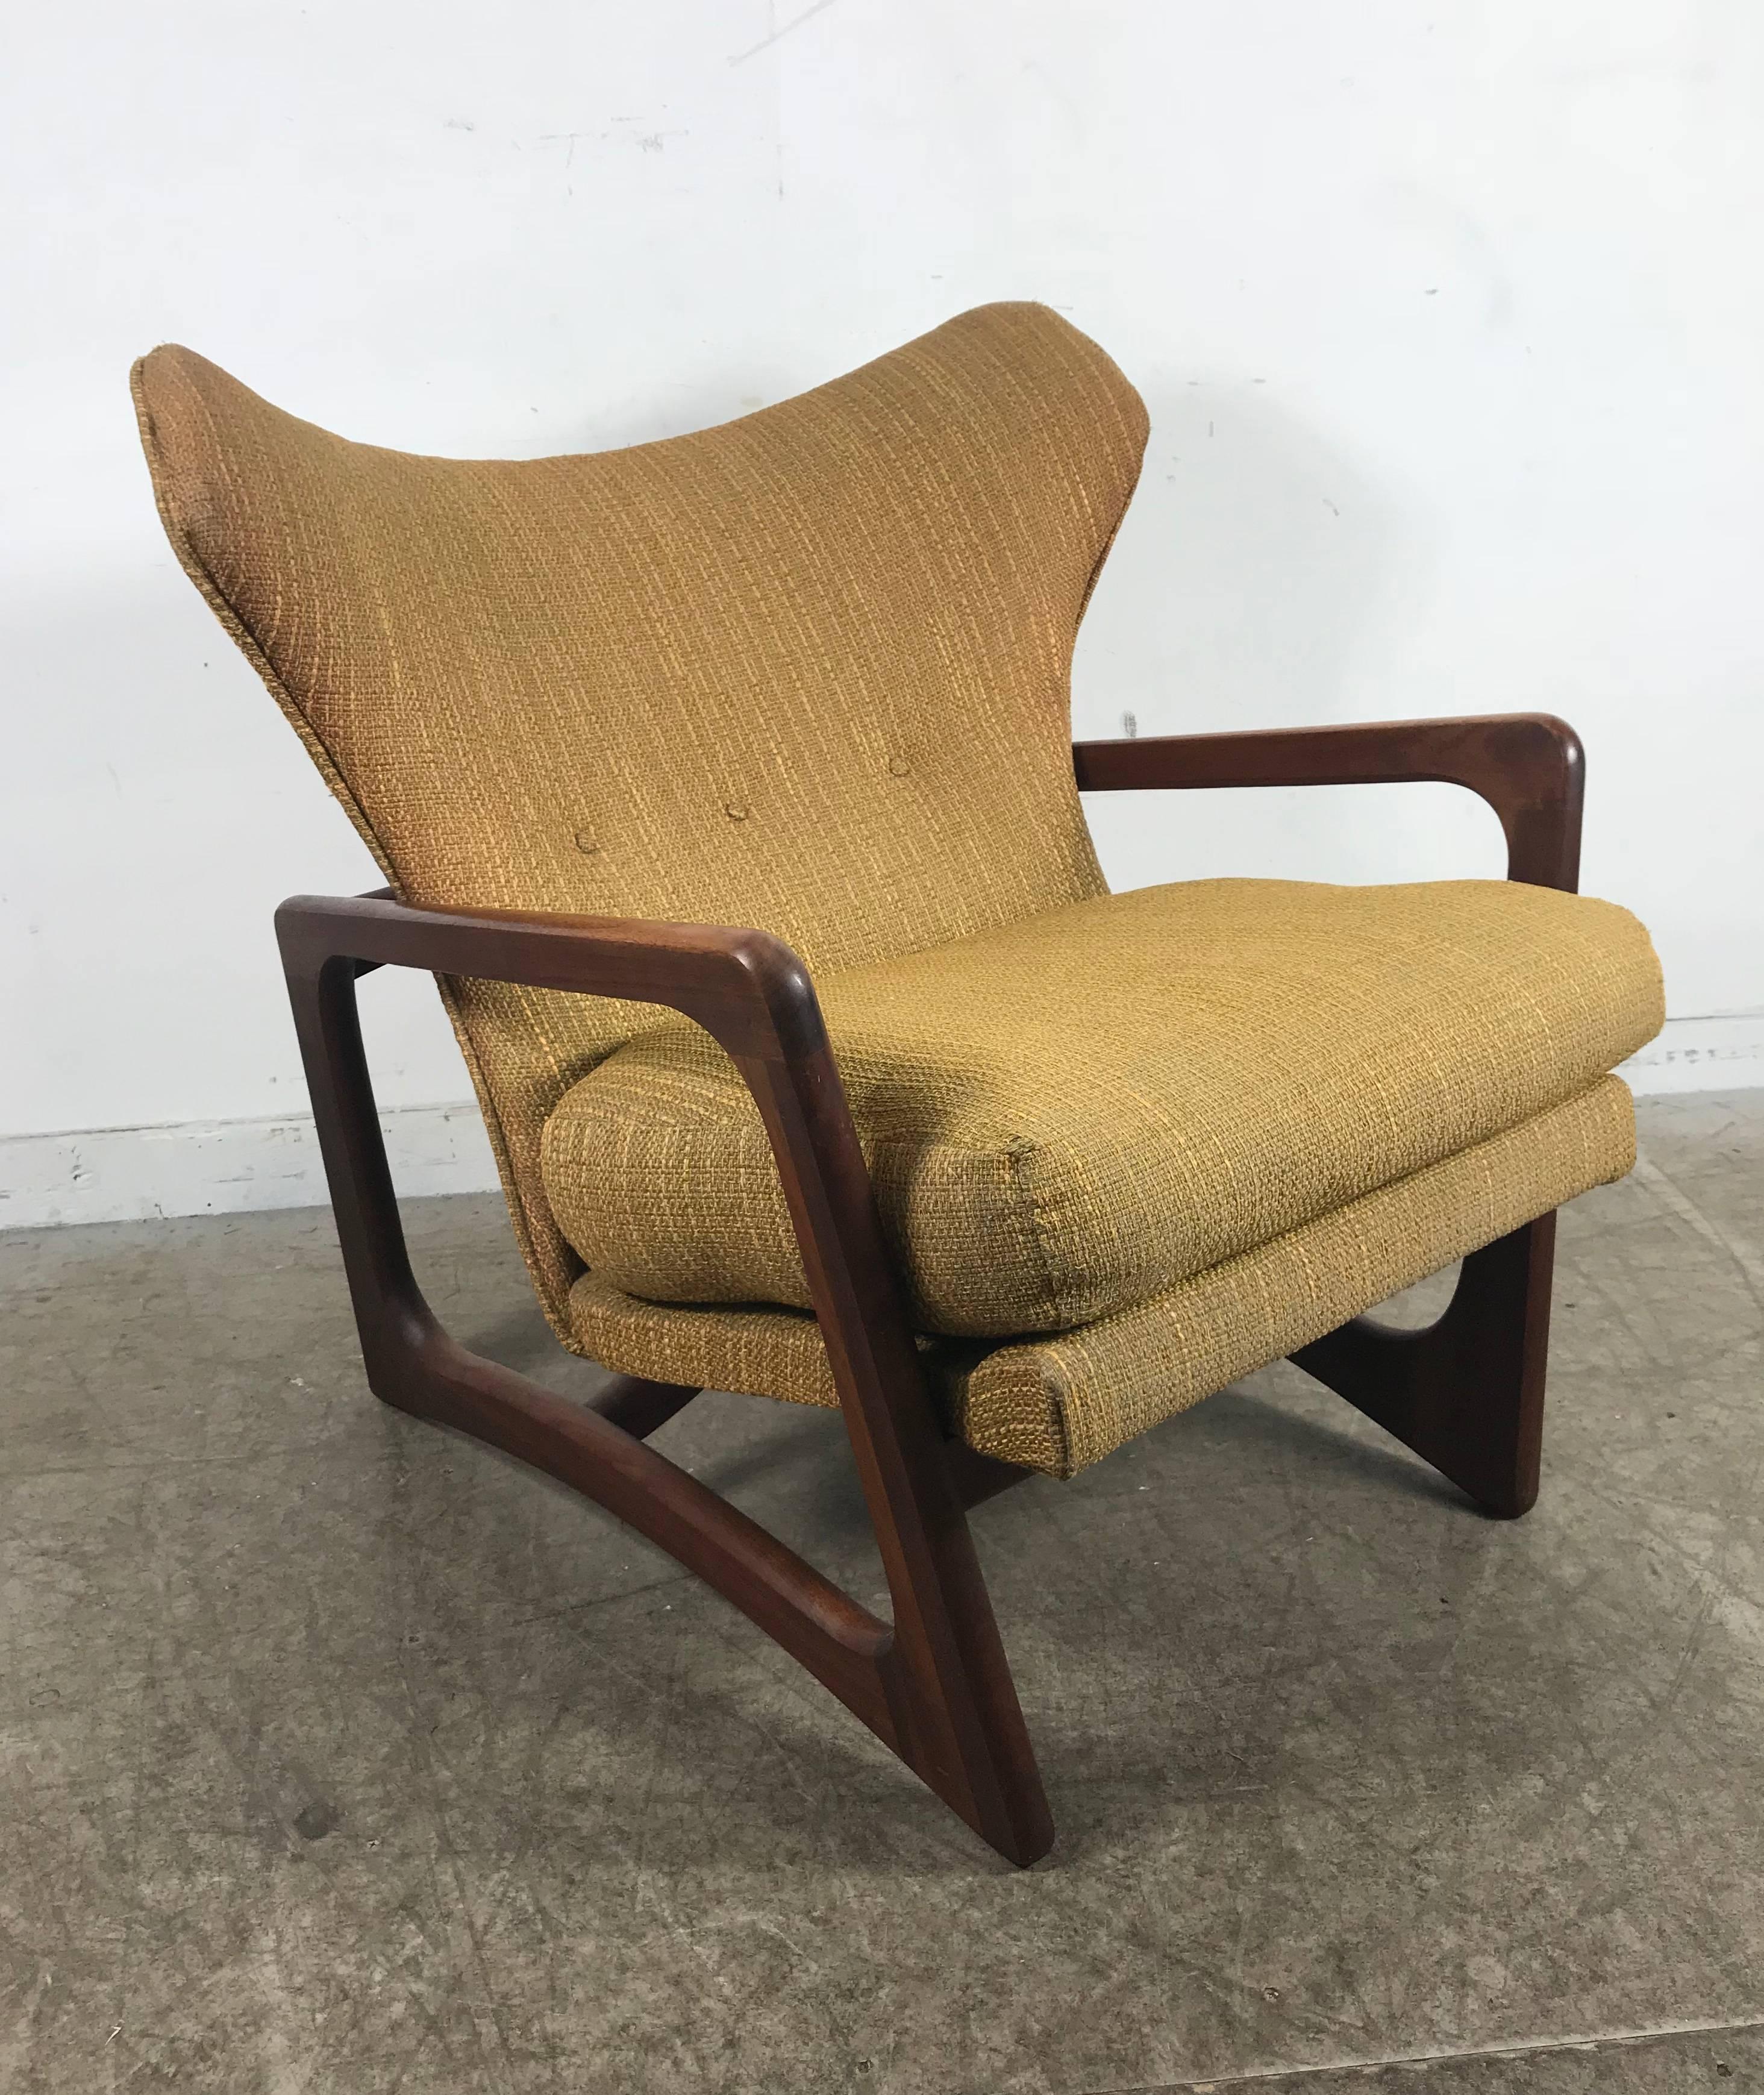 Modernist Sculptural Walnut Wing Back Lounge Chair by Adrian Pearsall 1